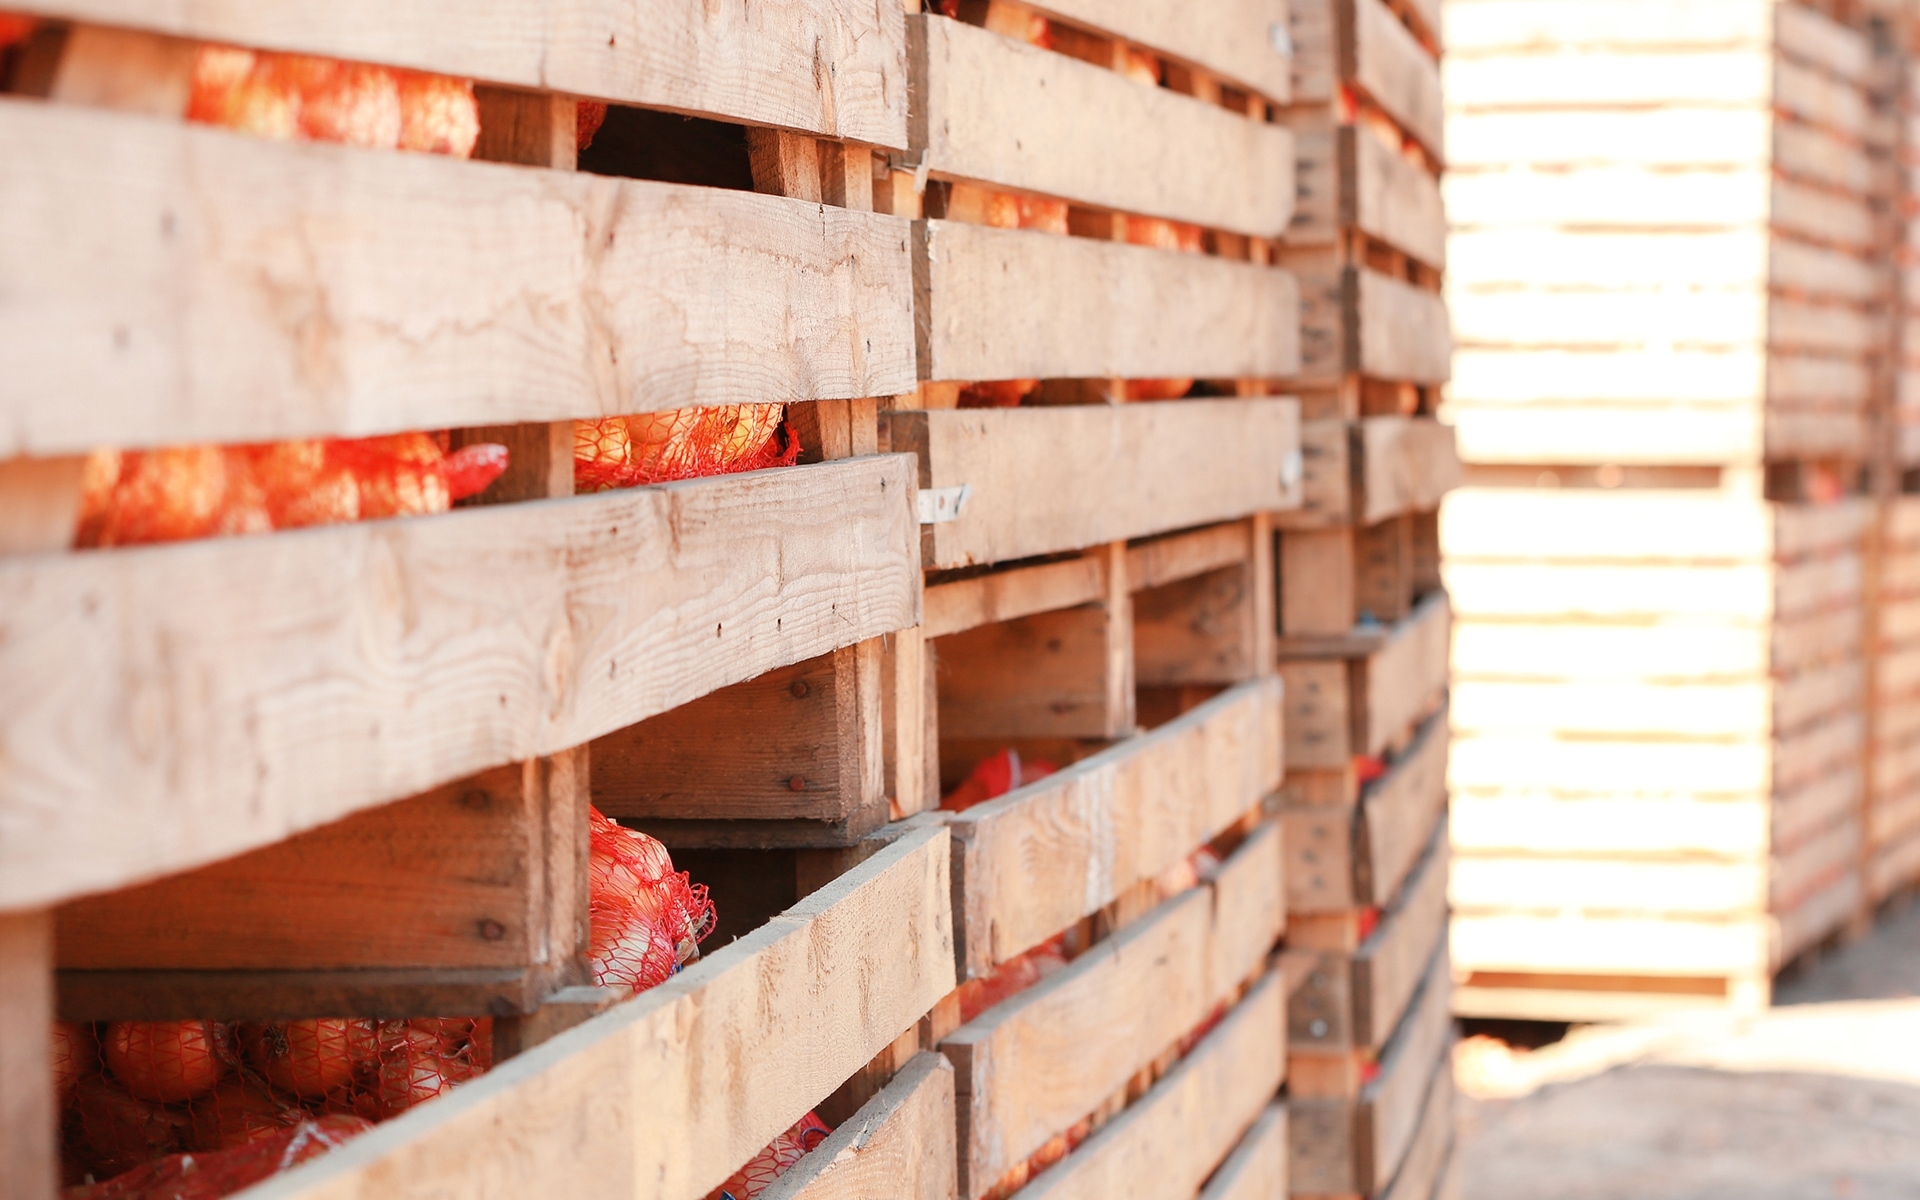 Onions being stored in wooden crates